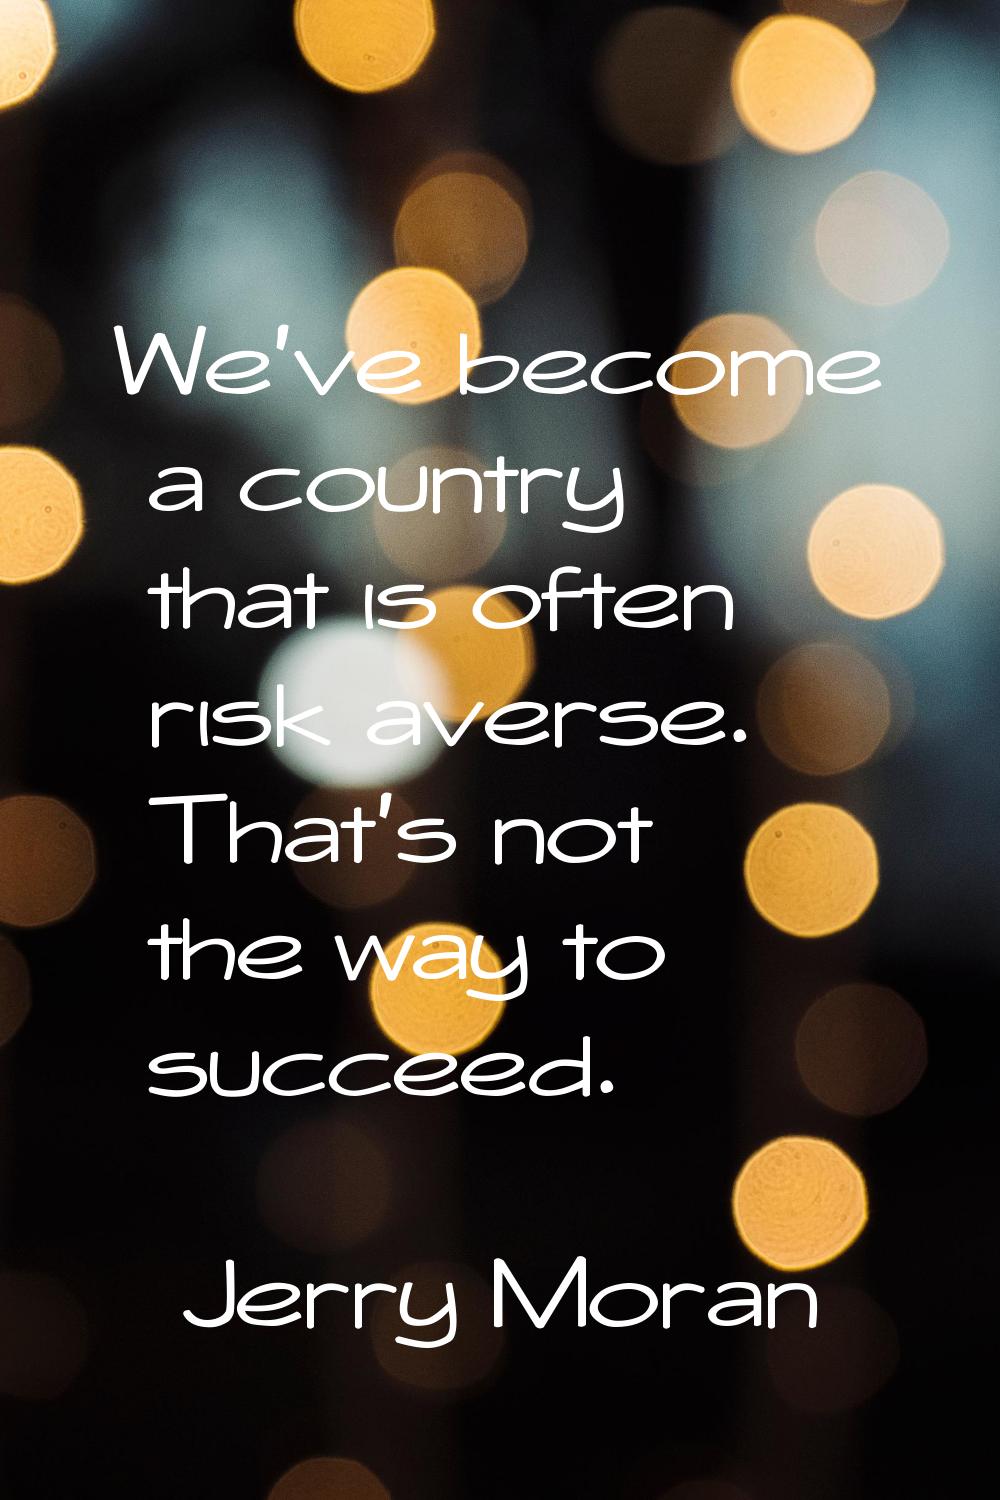 We've become a country that is often risk averse. That's not the way to succeed.